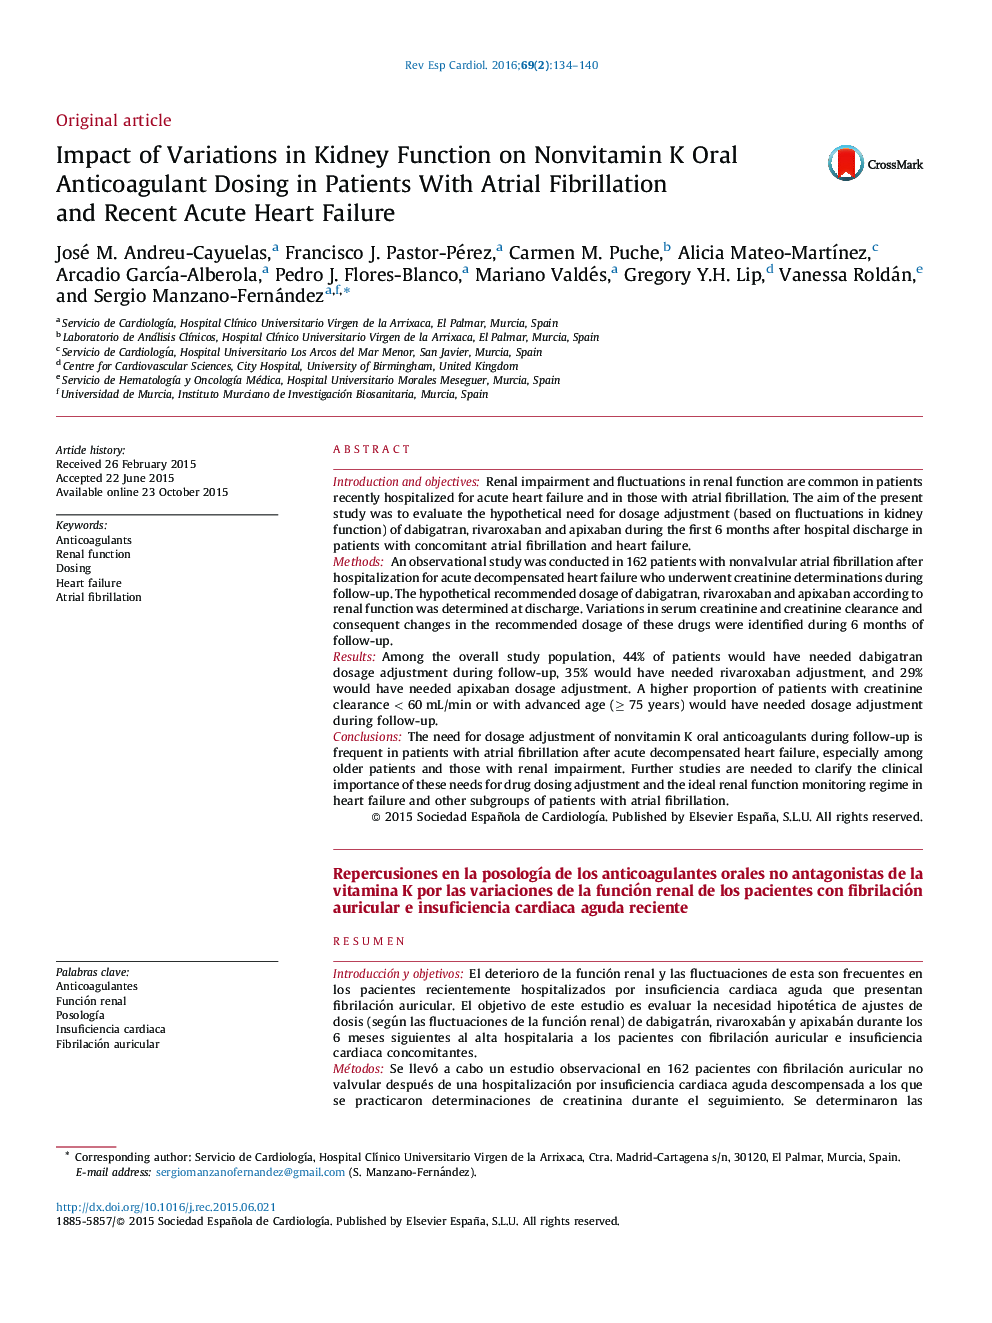 Impact of Variations in Kidney Function on Nonvitamin K Oral Anticoagulant Dosing in Patients With Atrial Fibrillation and Recent Acute Heart Failure